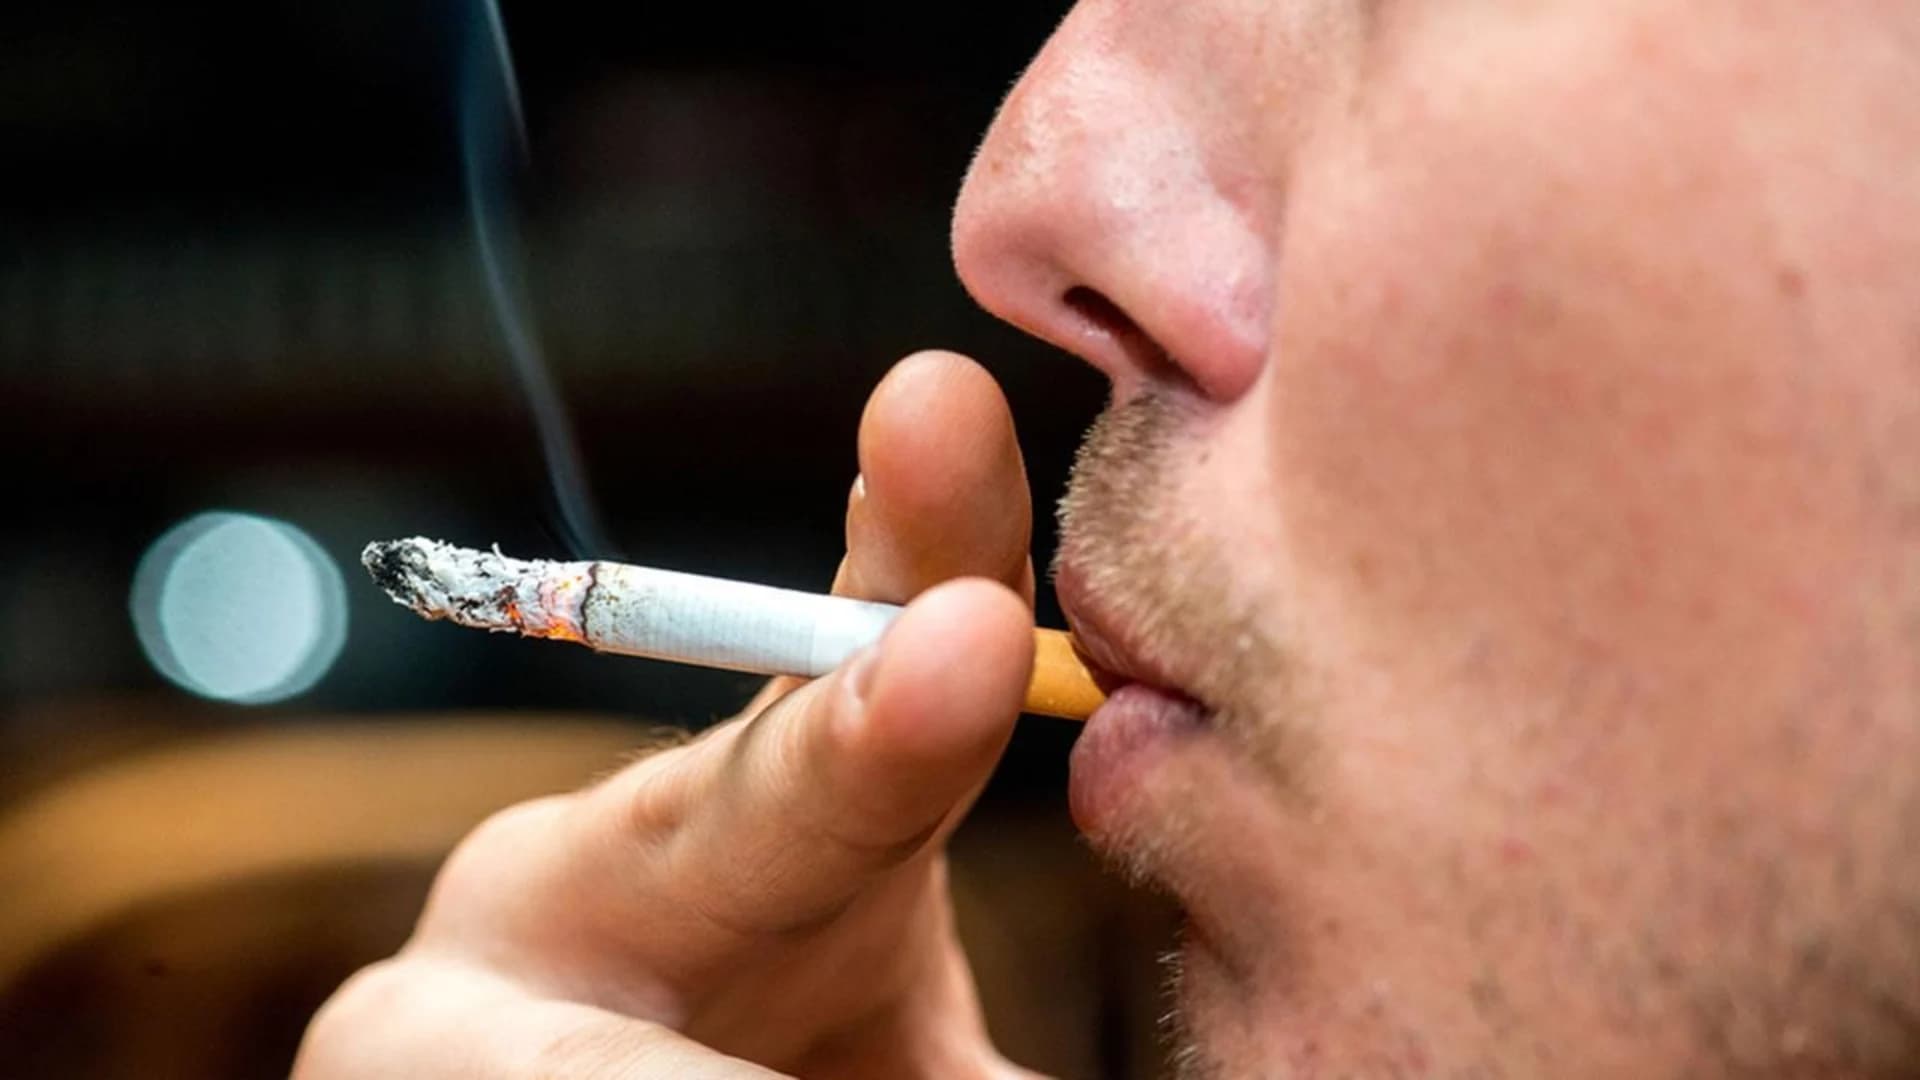 Smoking age may be raised in Westchester